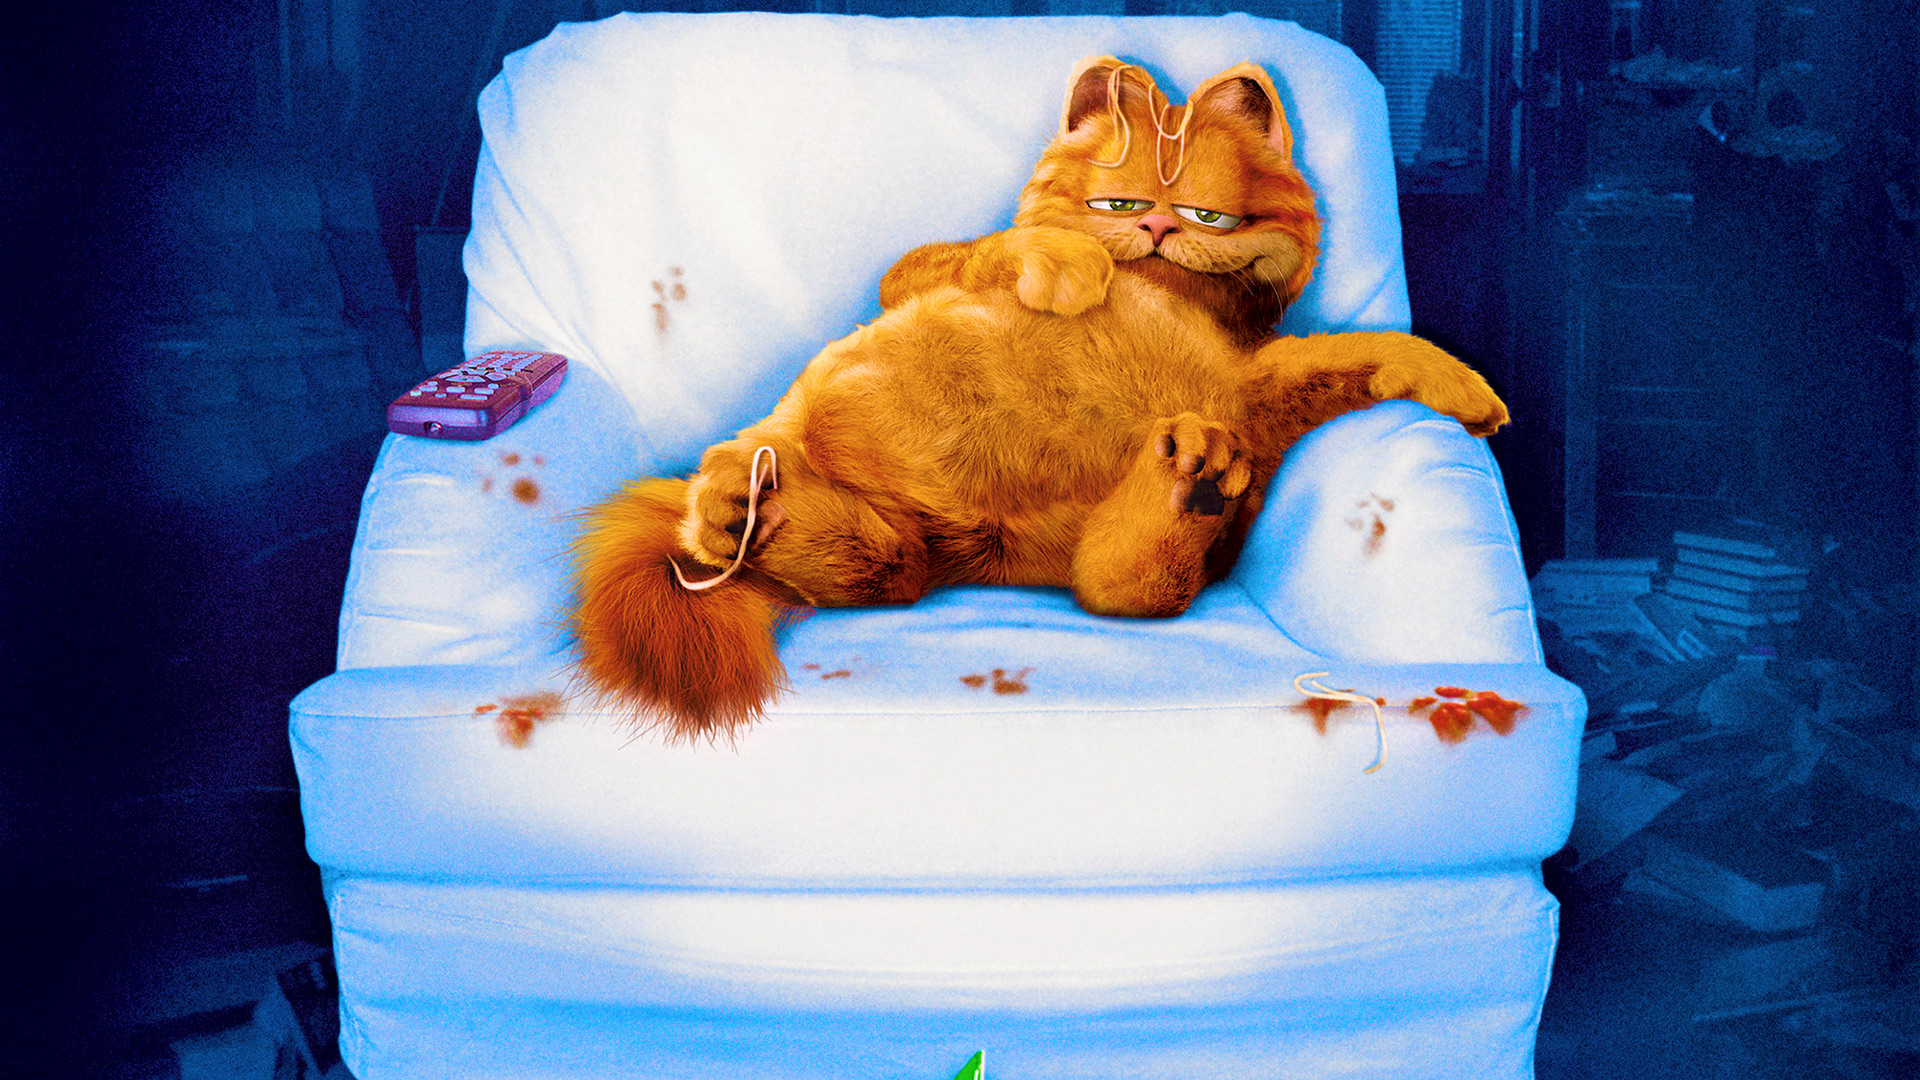 Desktop Wallpaper Garfield: The Movie, Animated Movie, HD Image, Picture, Background, Gnjnah